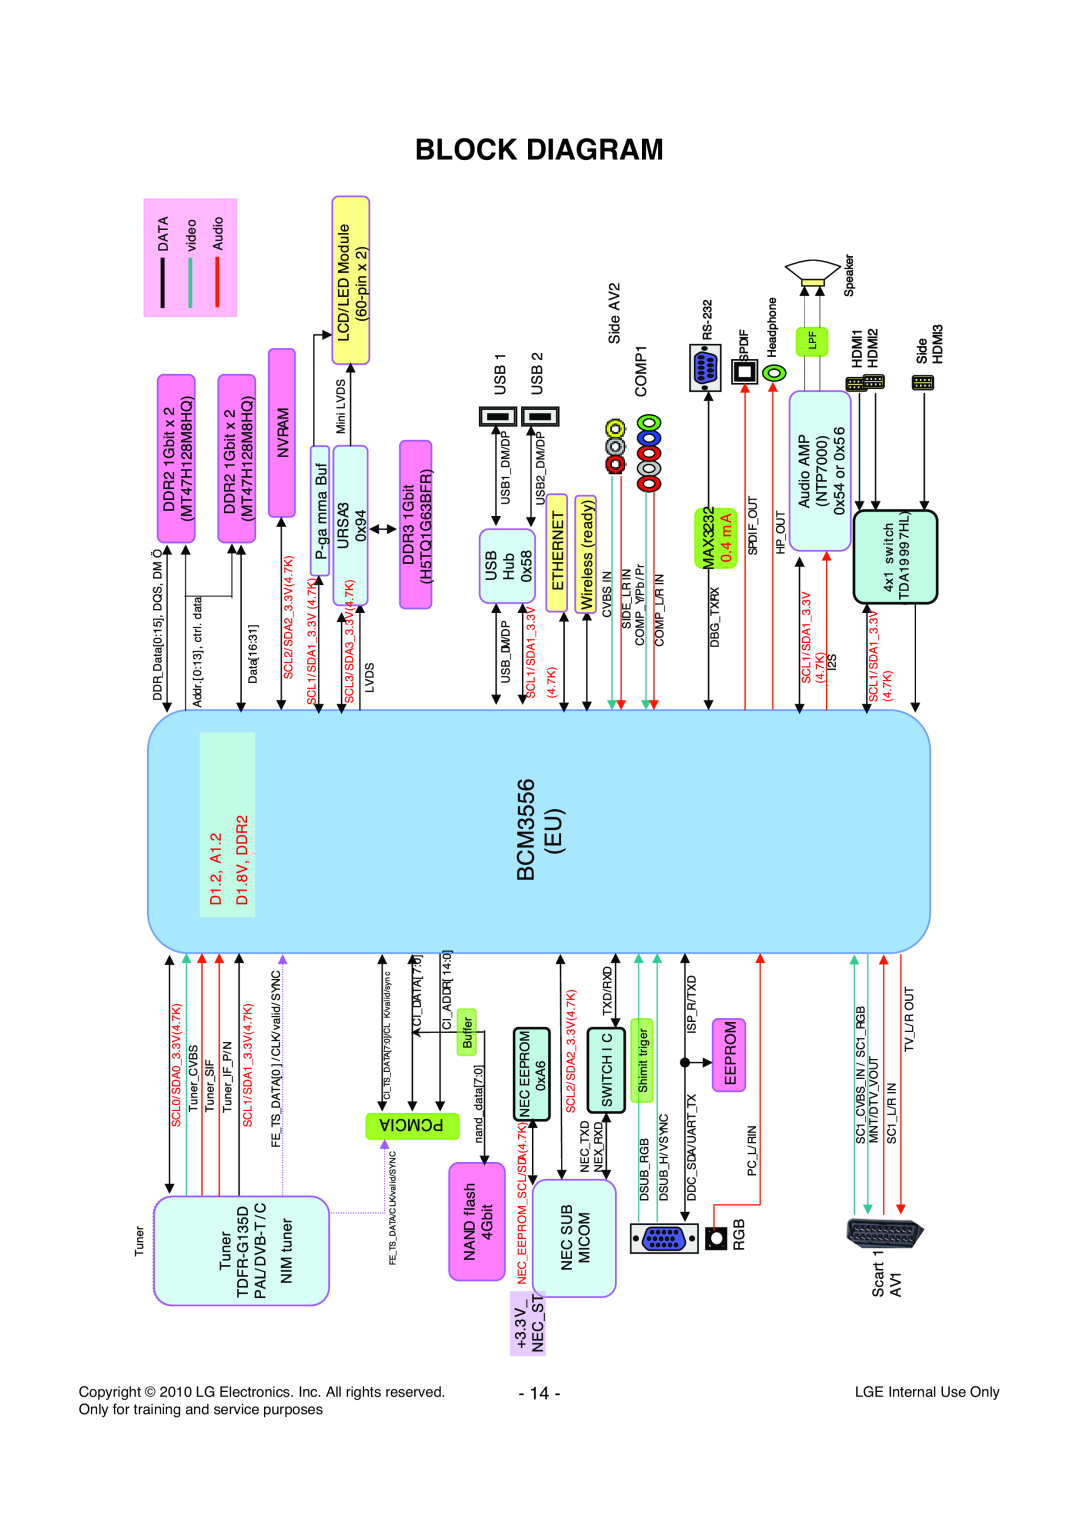 LG Electronics 47LE730N-ZA Block Diagram, Copyright 2010 LG Electronics. Inc. All rights reserved, LGE Internal Use Only 